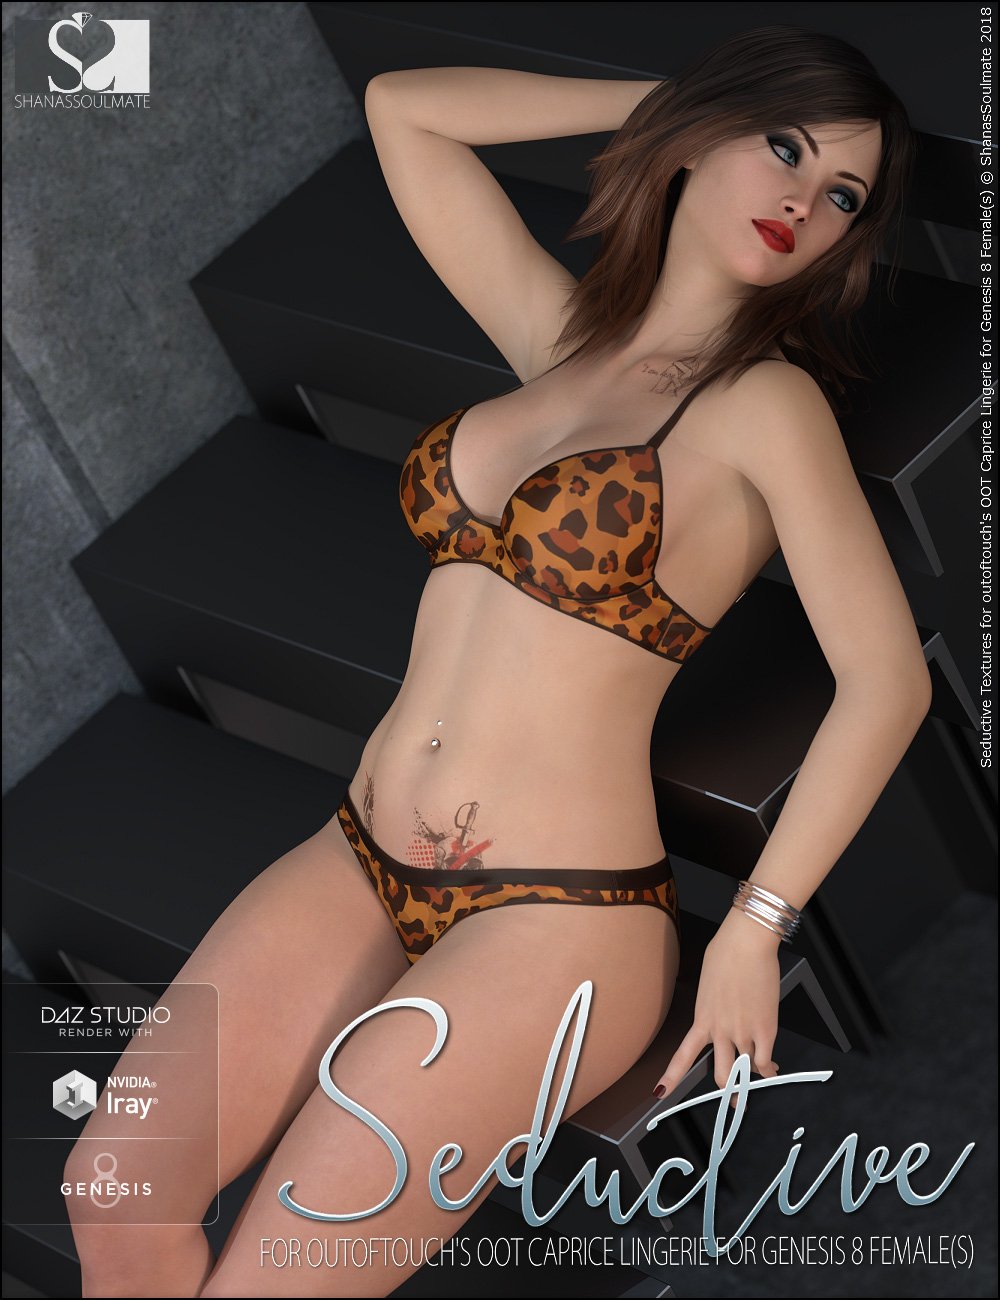 Seductive Textures for OOT Caprice Lingerie by: ShanasSoulmate, 3D Models by Daz 3D